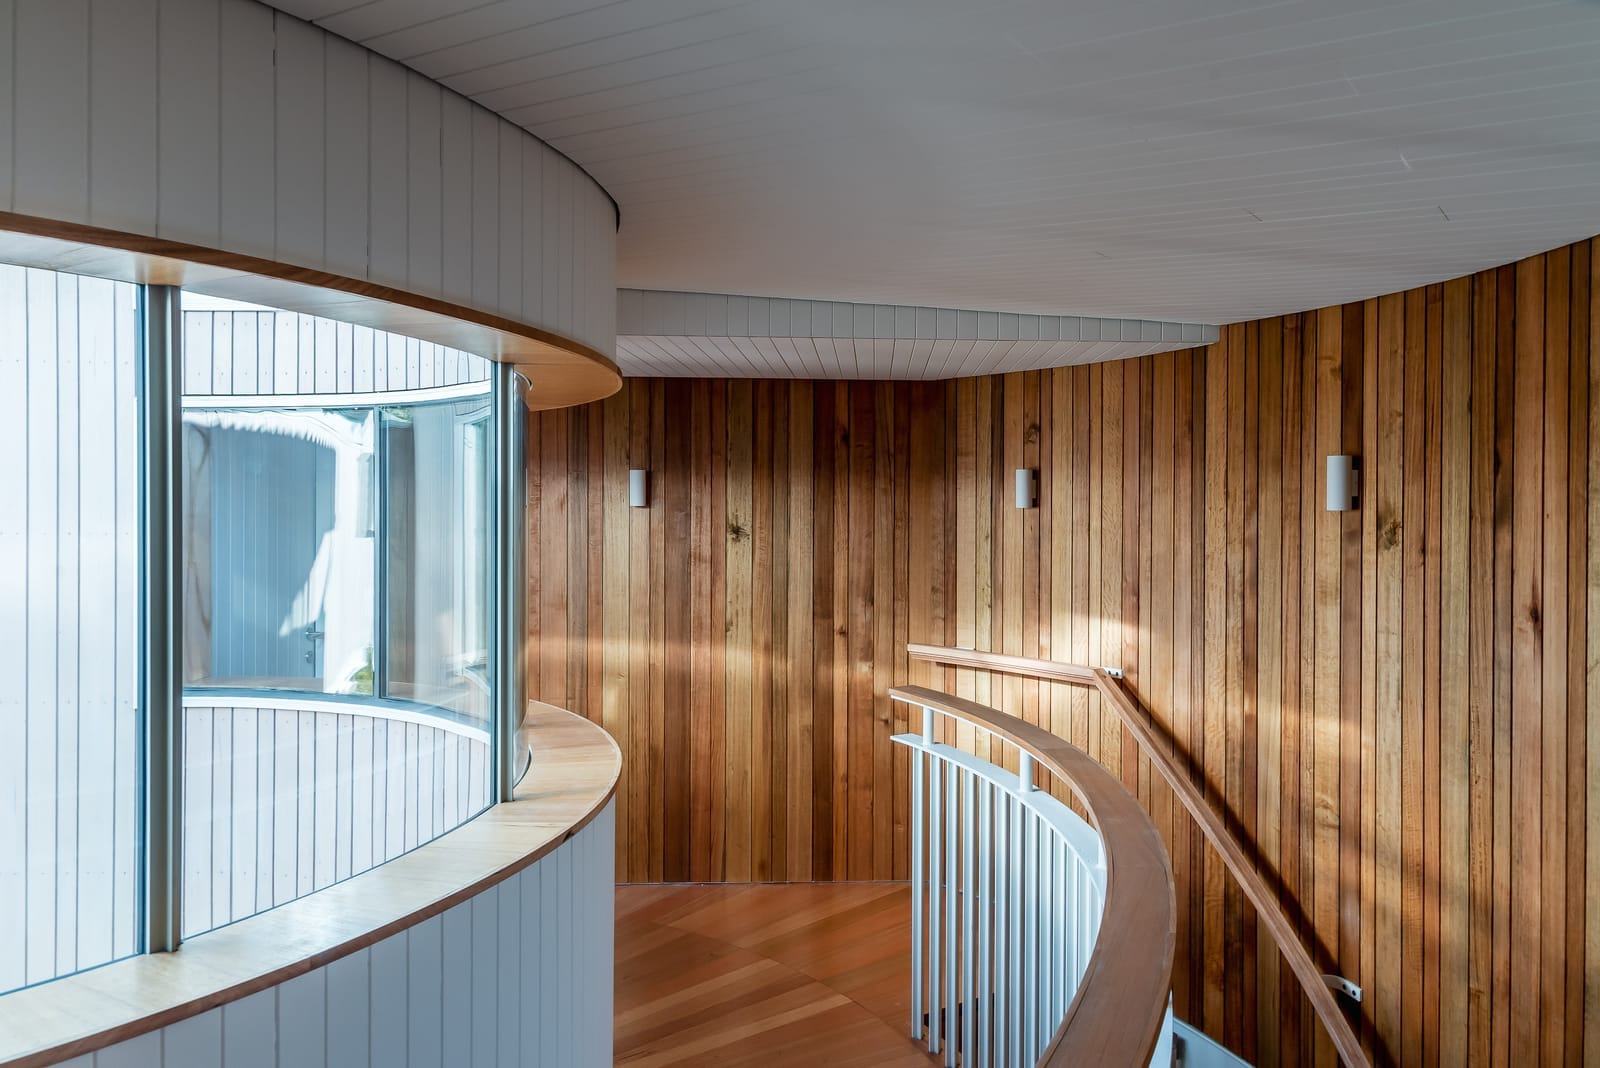 Wattle Bird House by Flett Architecture. Photography by Matt Sansom. Curved hallway and staircase with timber clad walls and ceiling. Timber balustrade and curved window.